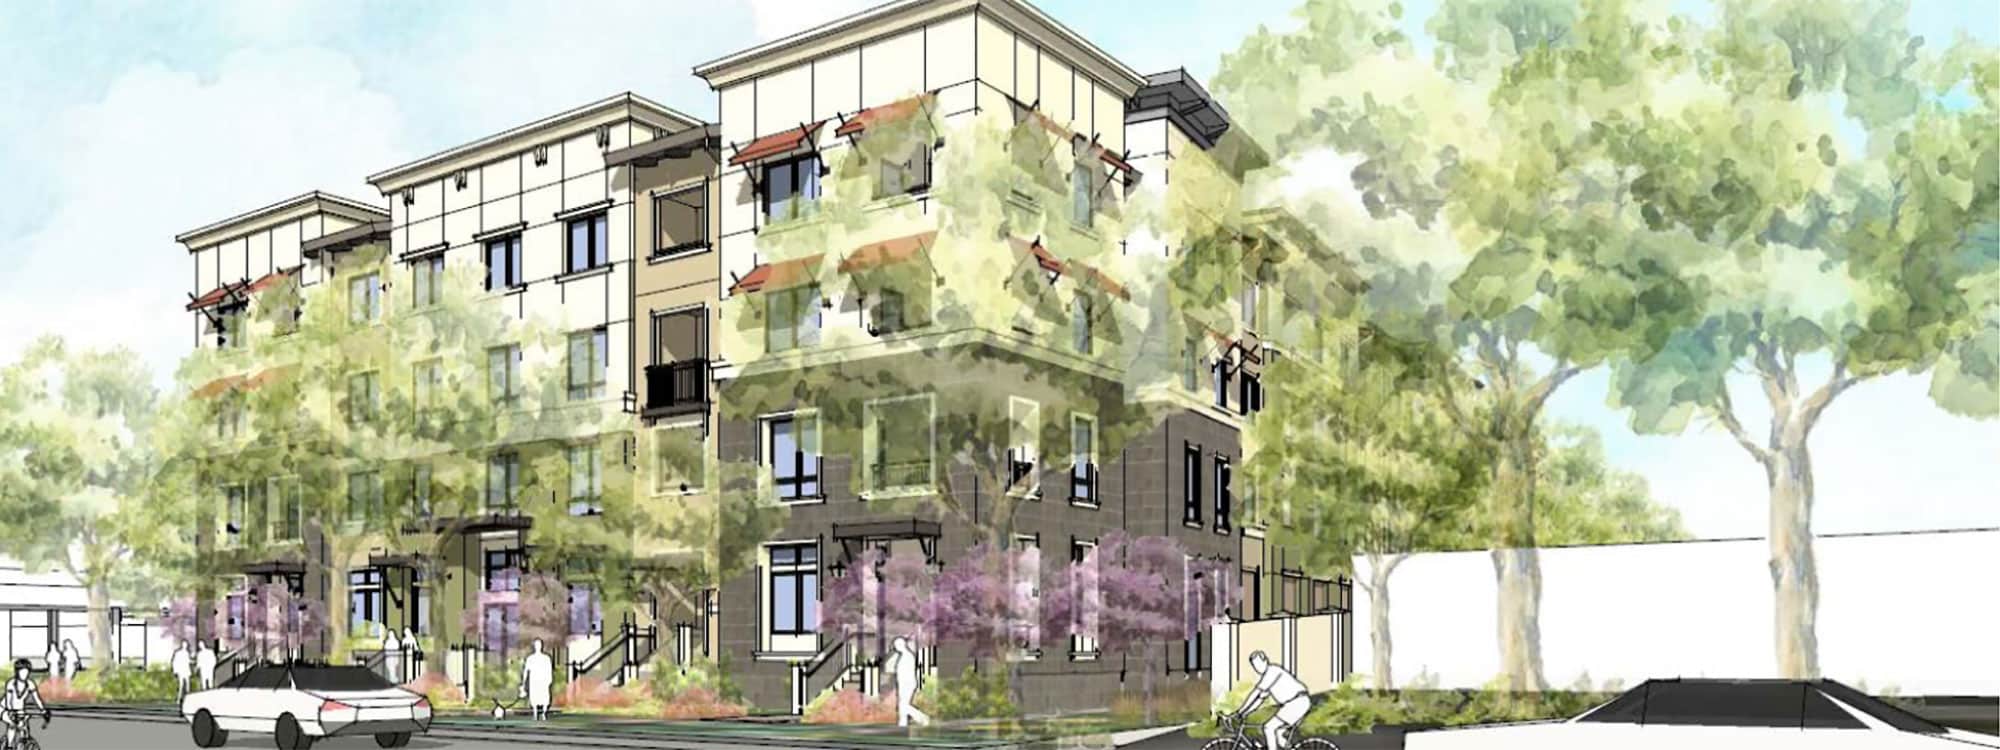 Evelyn Apartments Rendering